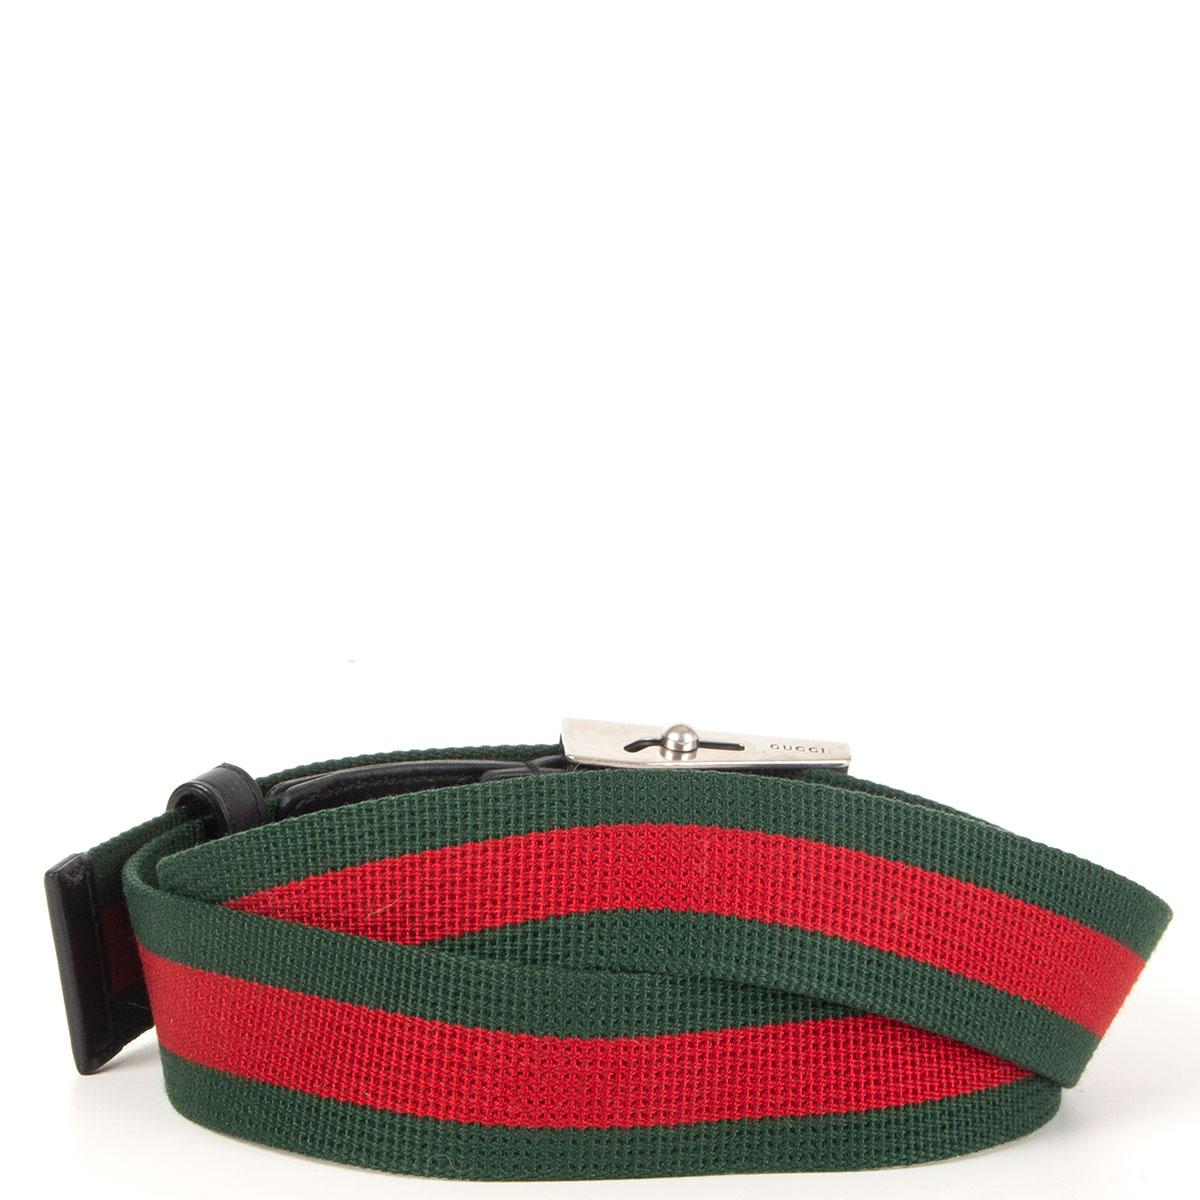 Gucci 'L'aveugle Par Amour' buckle Web belt in green and red with black leather trim. Has been worn and is in excellent condition. 

Tag Size 95
Width 3.5cm (1.4in)
Length 111cm (43.3in)
Buckle Size Height 4cm (1.6in)